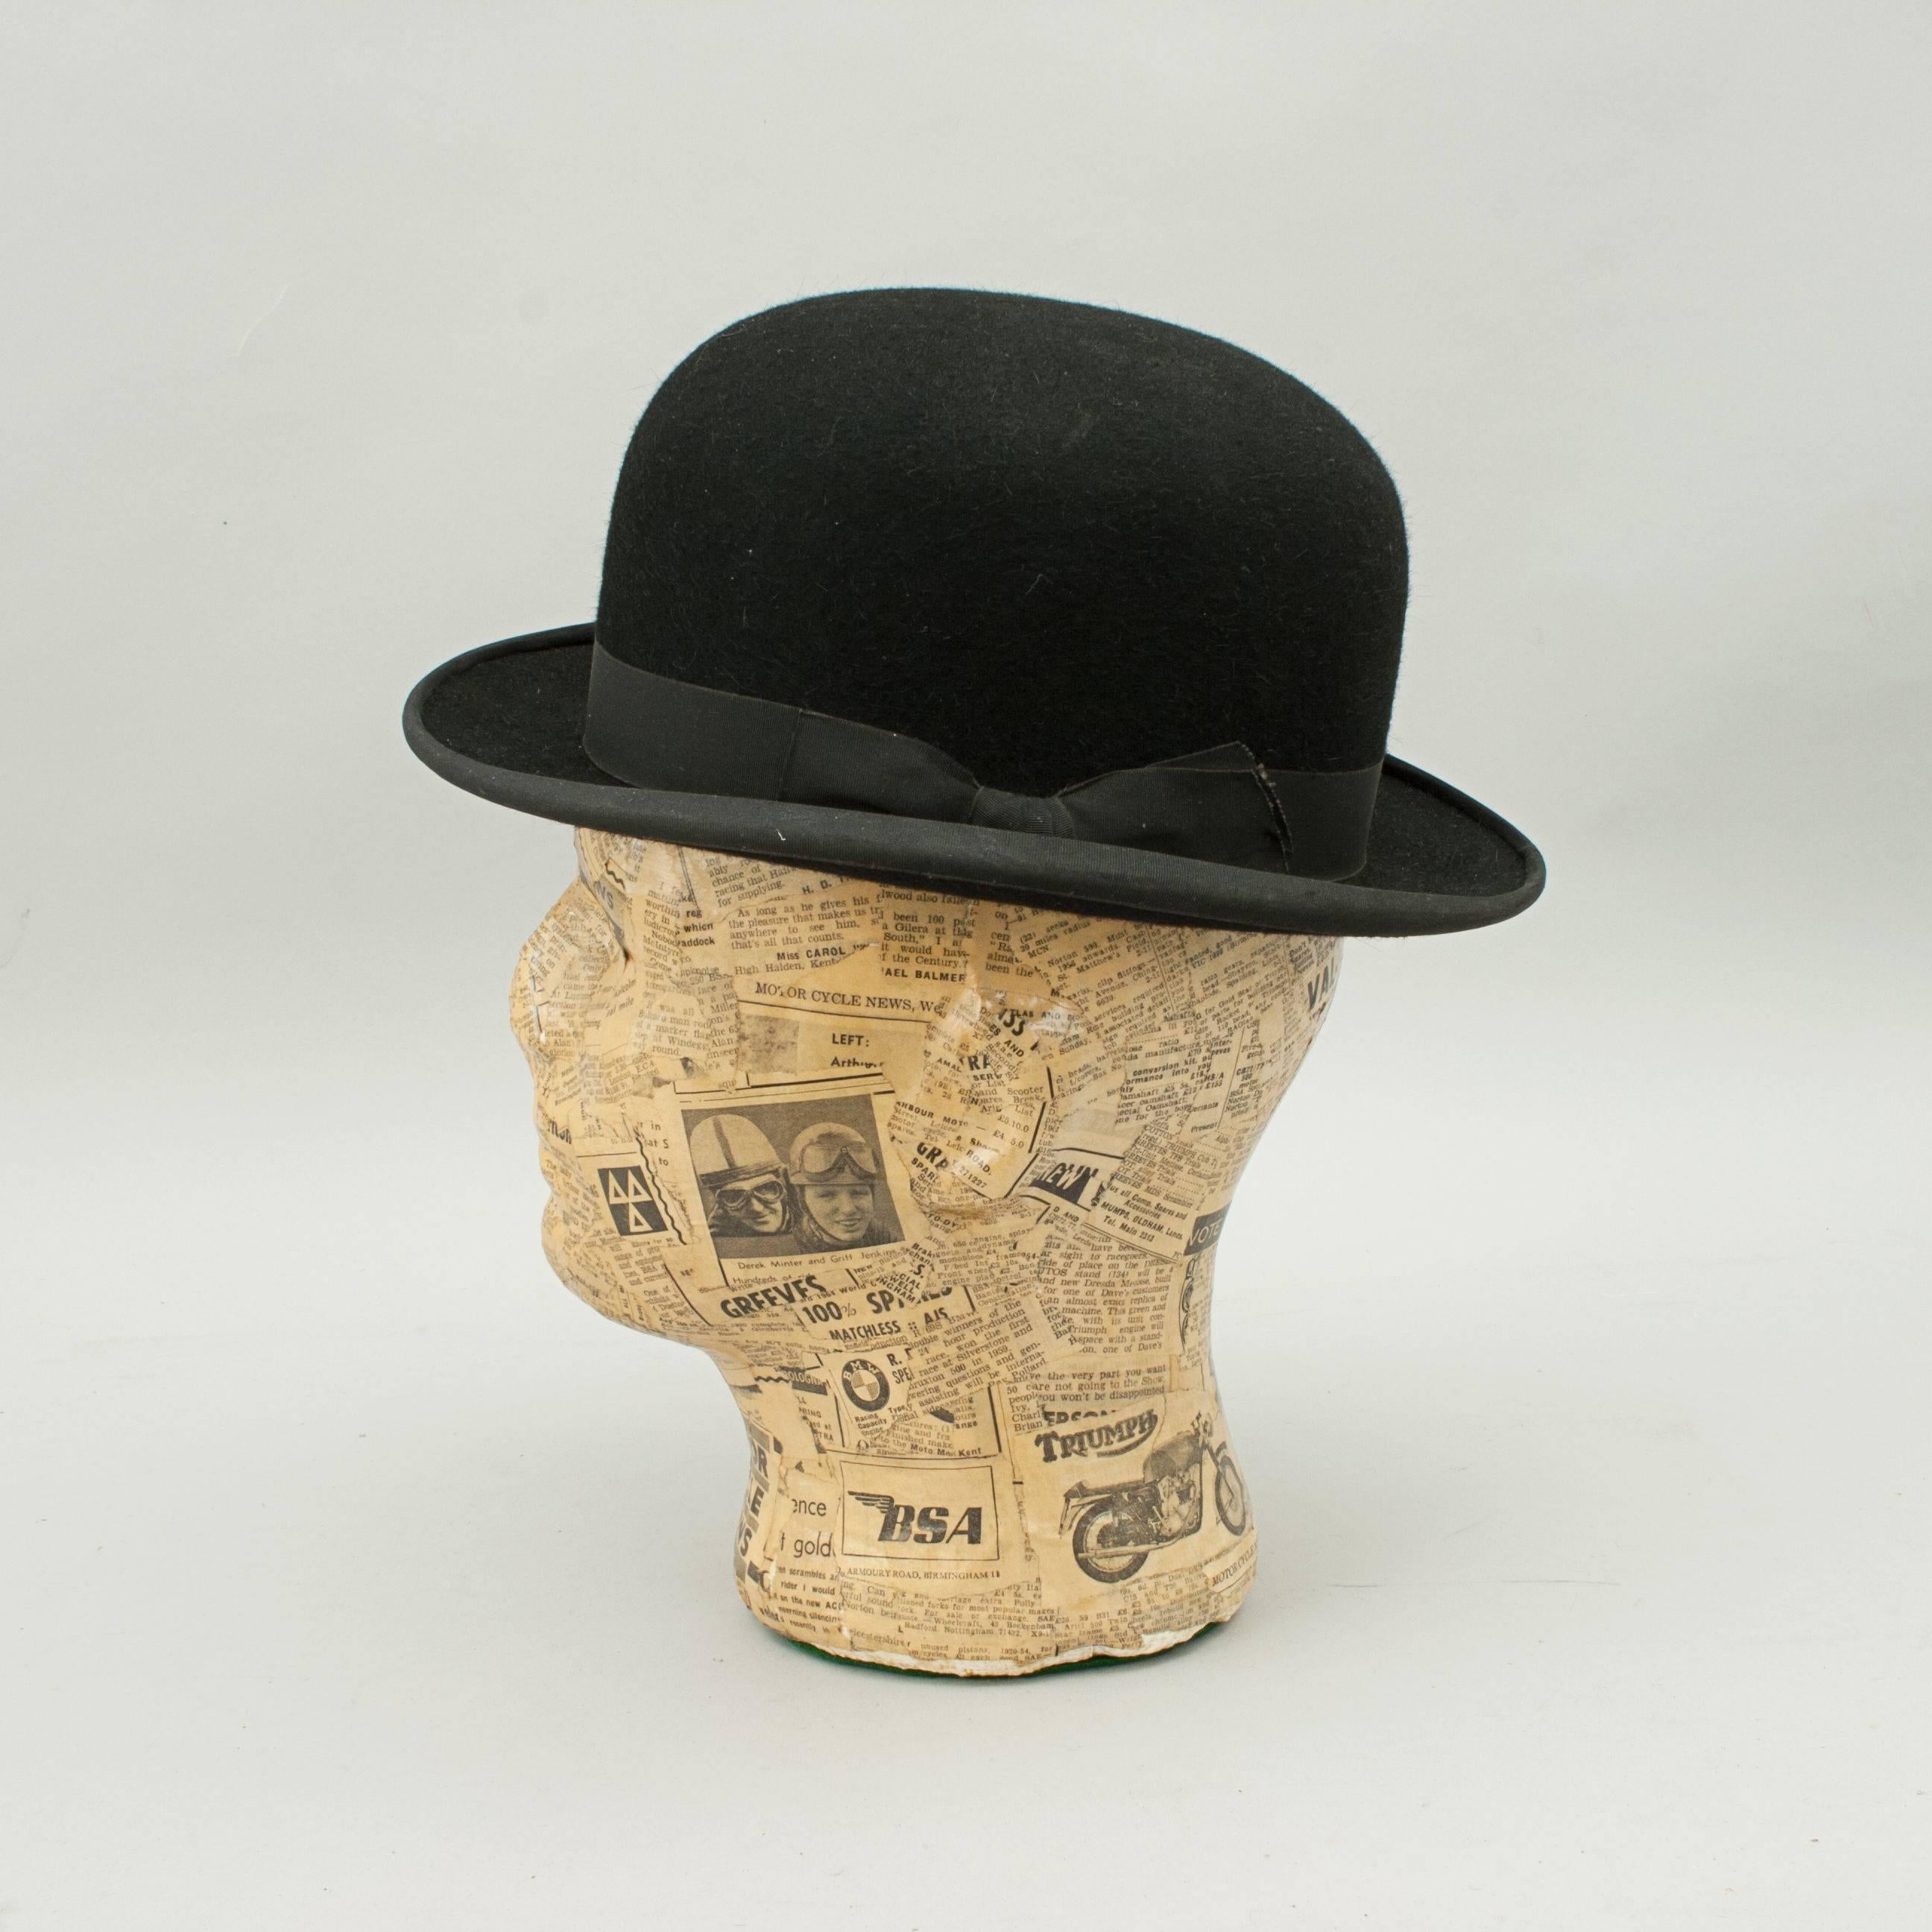 Equestrian bowler hat by Herbert Johnson. 
A hard crown black bowler hat with a shaped brim made by Herbert Johnson, New Bond Street. The black felt hat is lined with white satin with the Herbert Johnson logo and details. The hat is finished with a